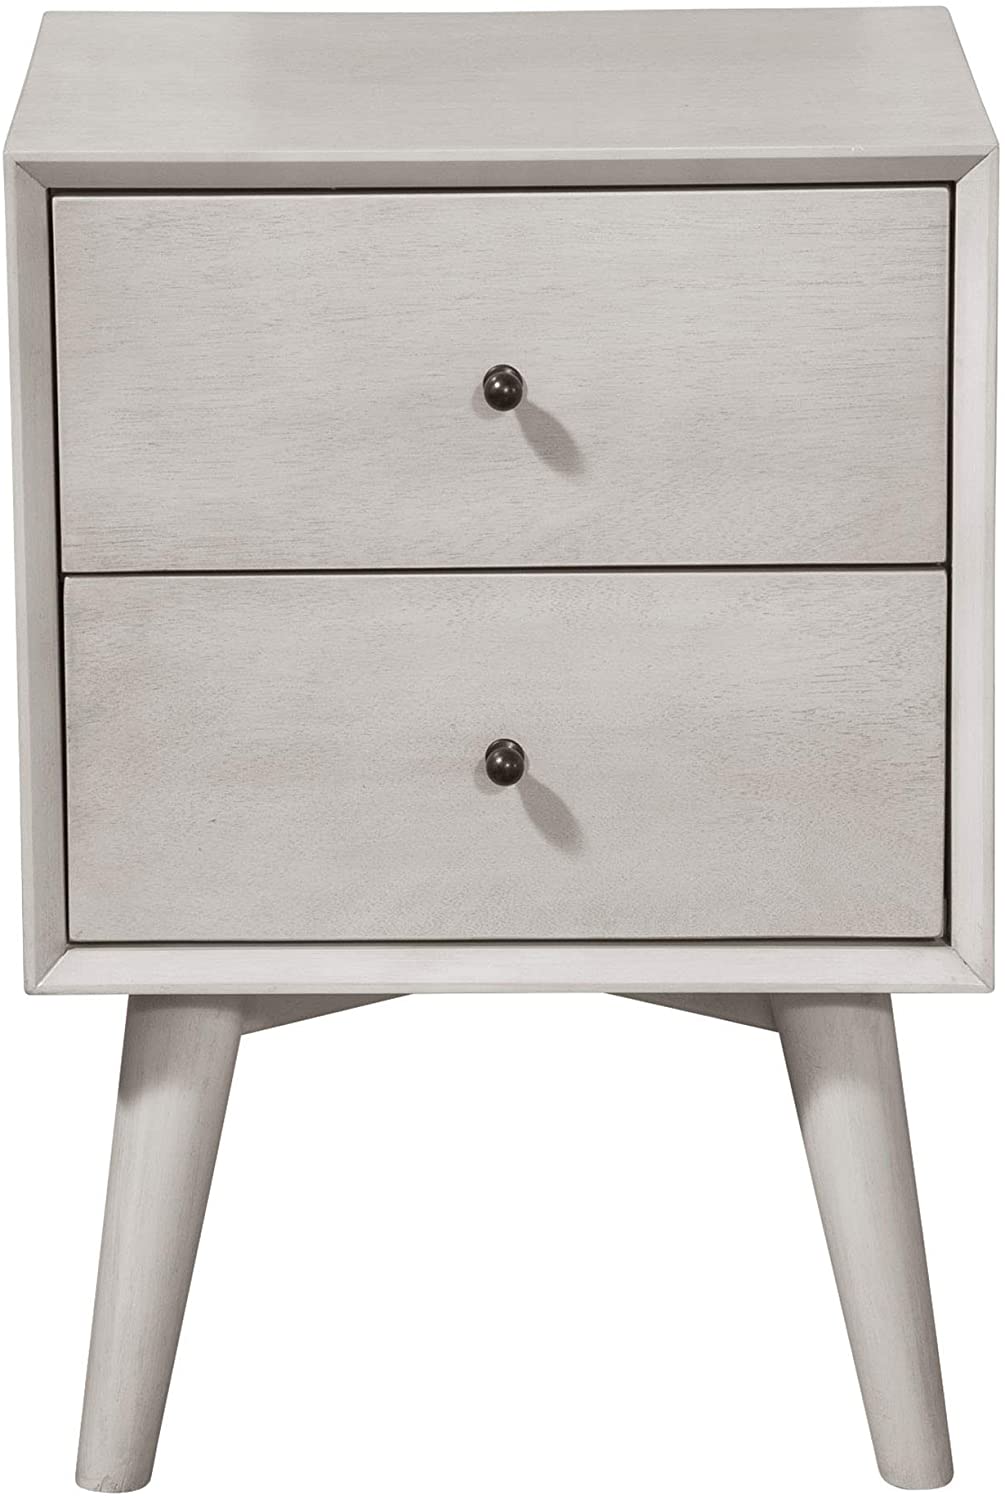 <strong>6. Alpine Furniture Flynn Nightstand</strong>